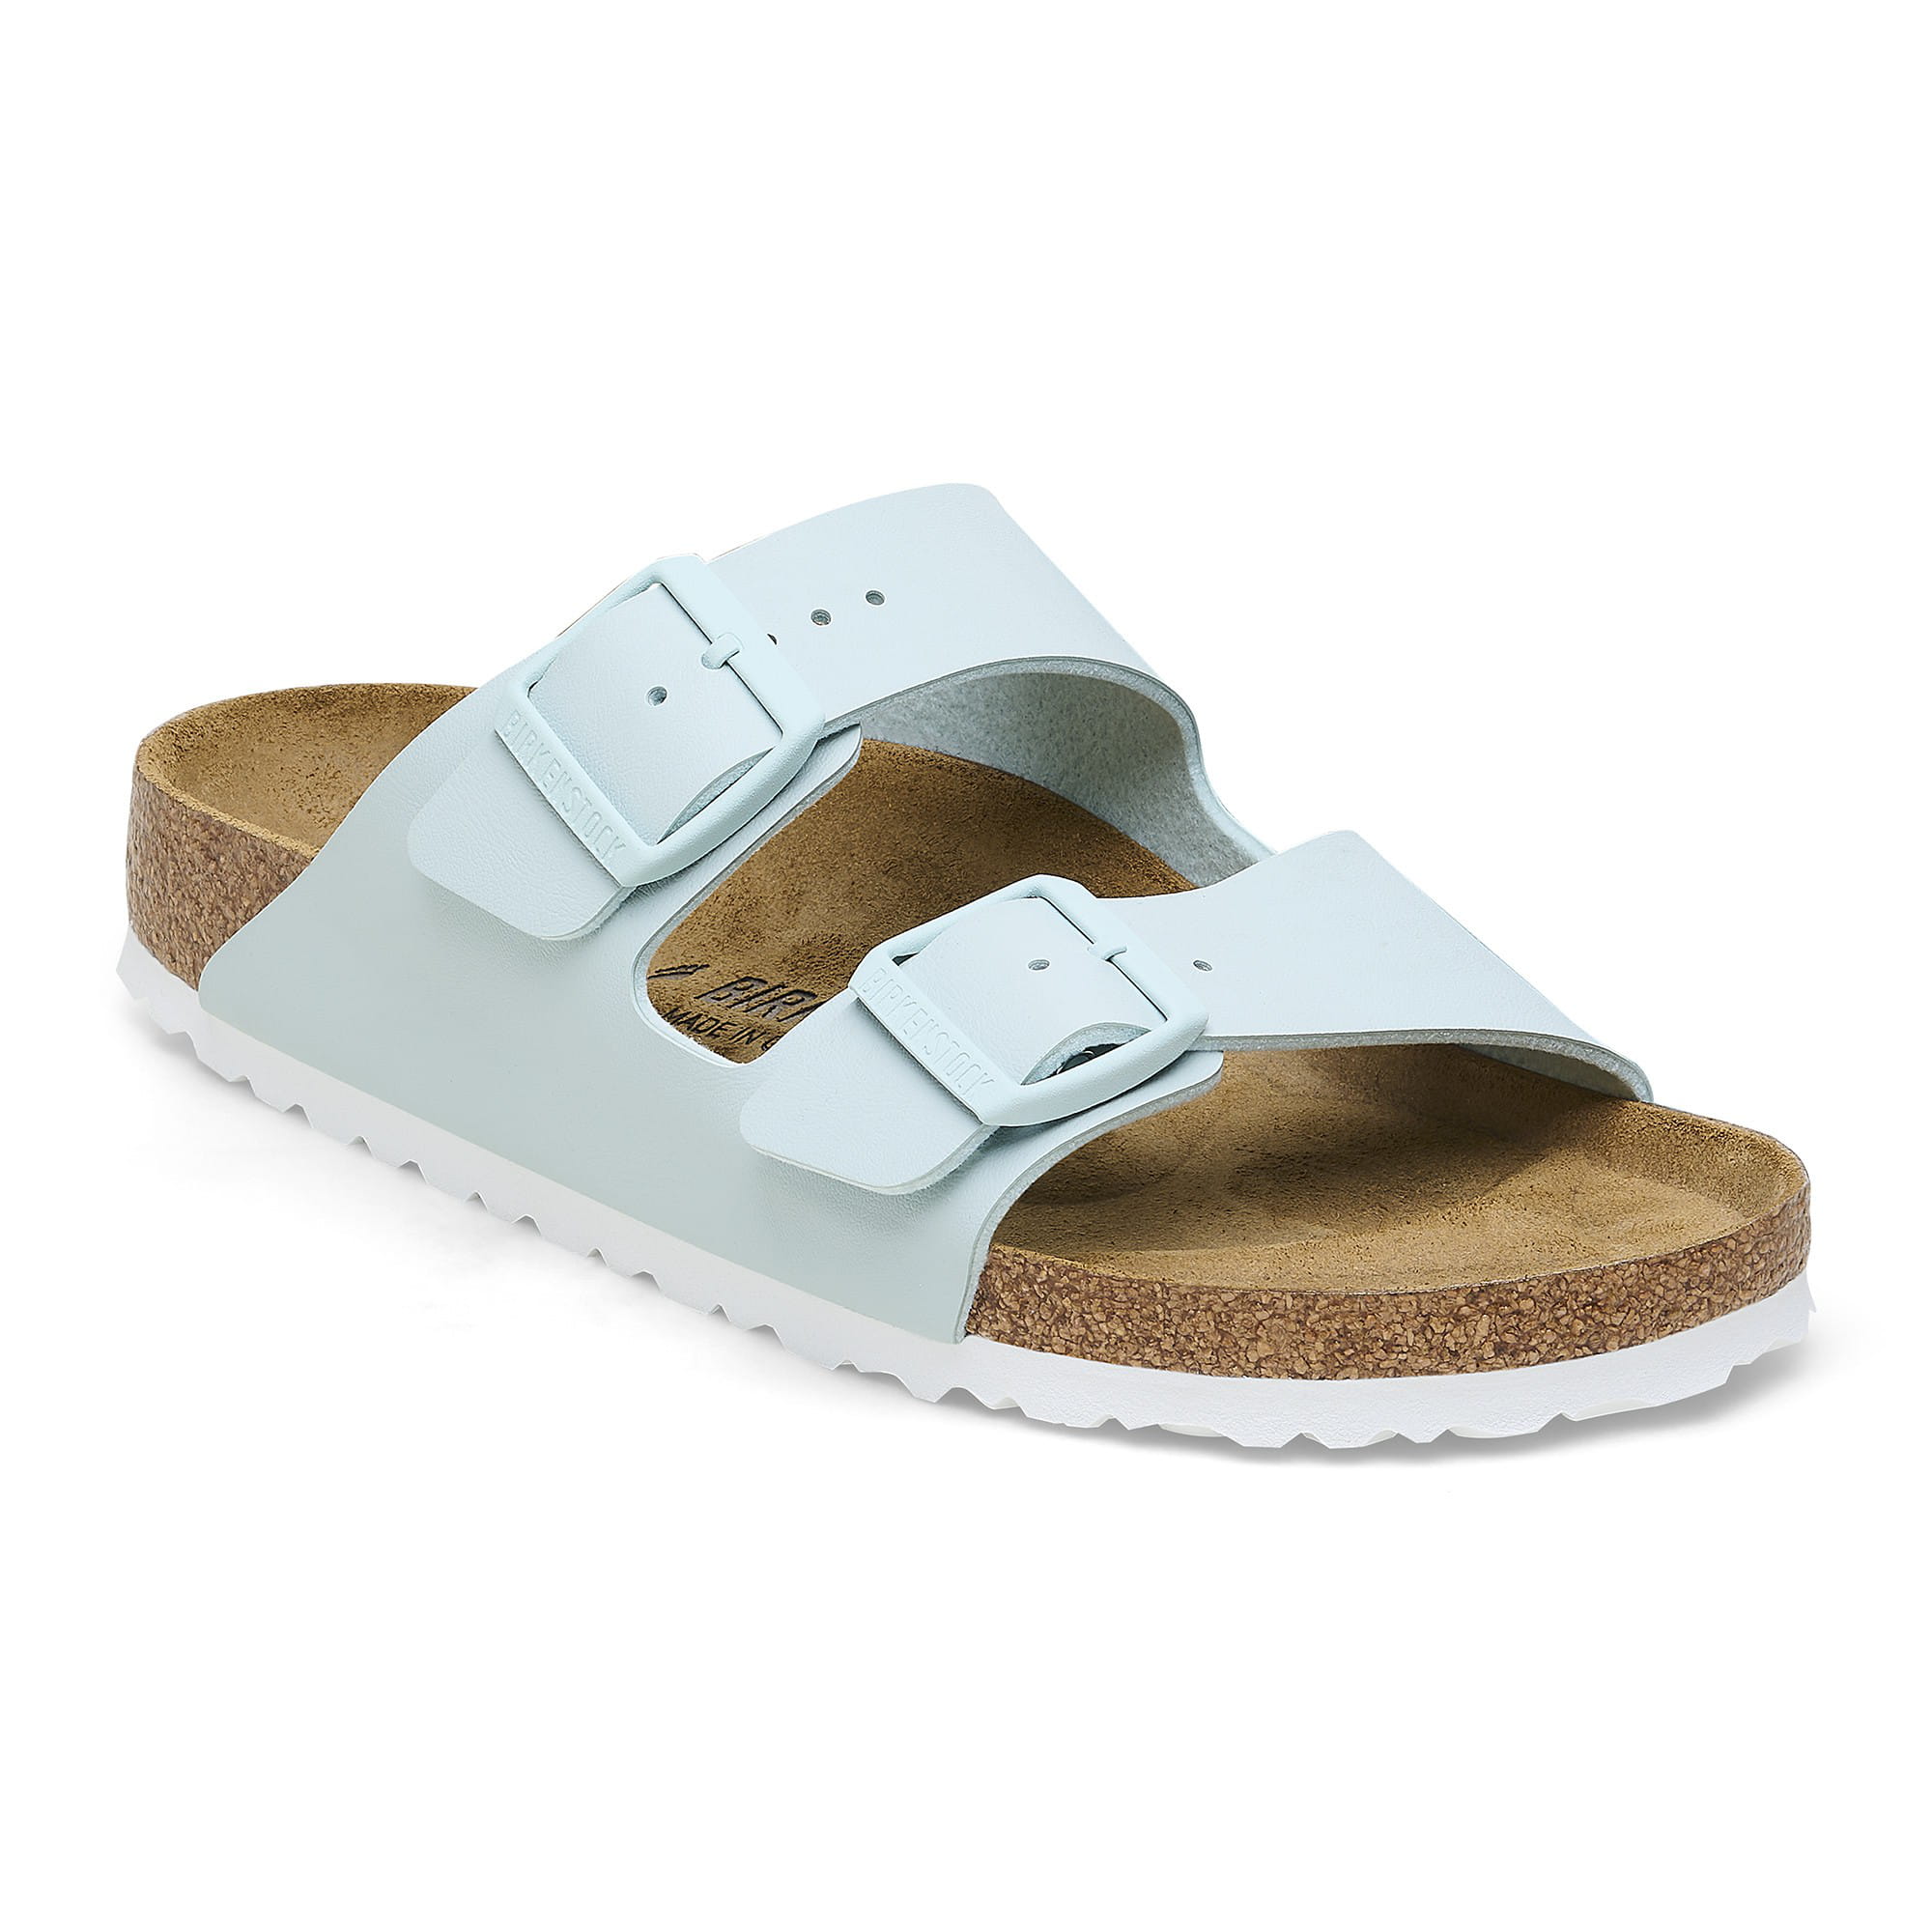 The complete sandal buying guide | Home › Blog